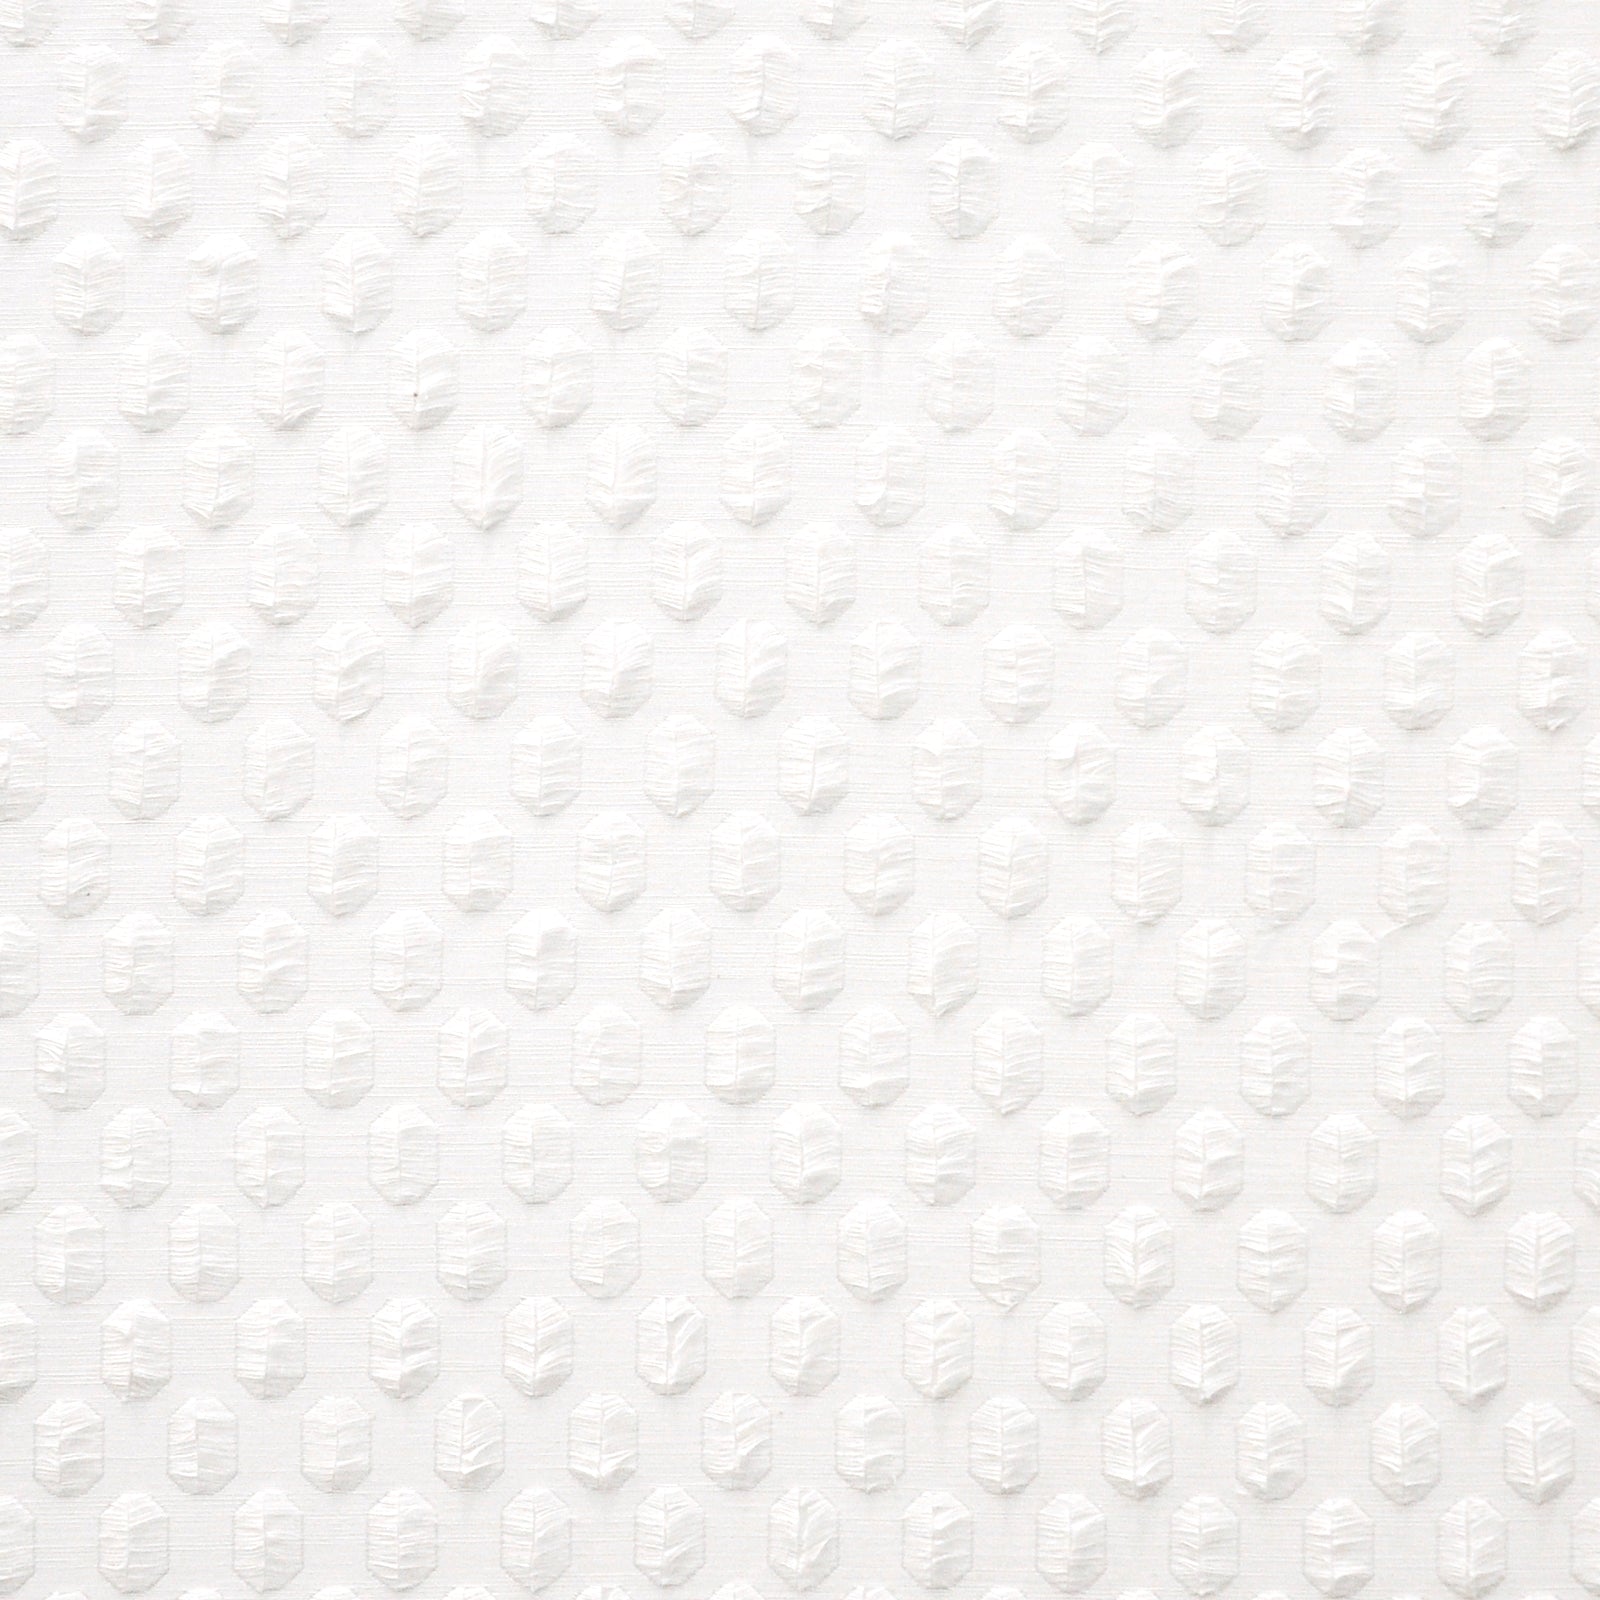 Purchase Maxwell Fabric - Lucarno, # 527 Optic White